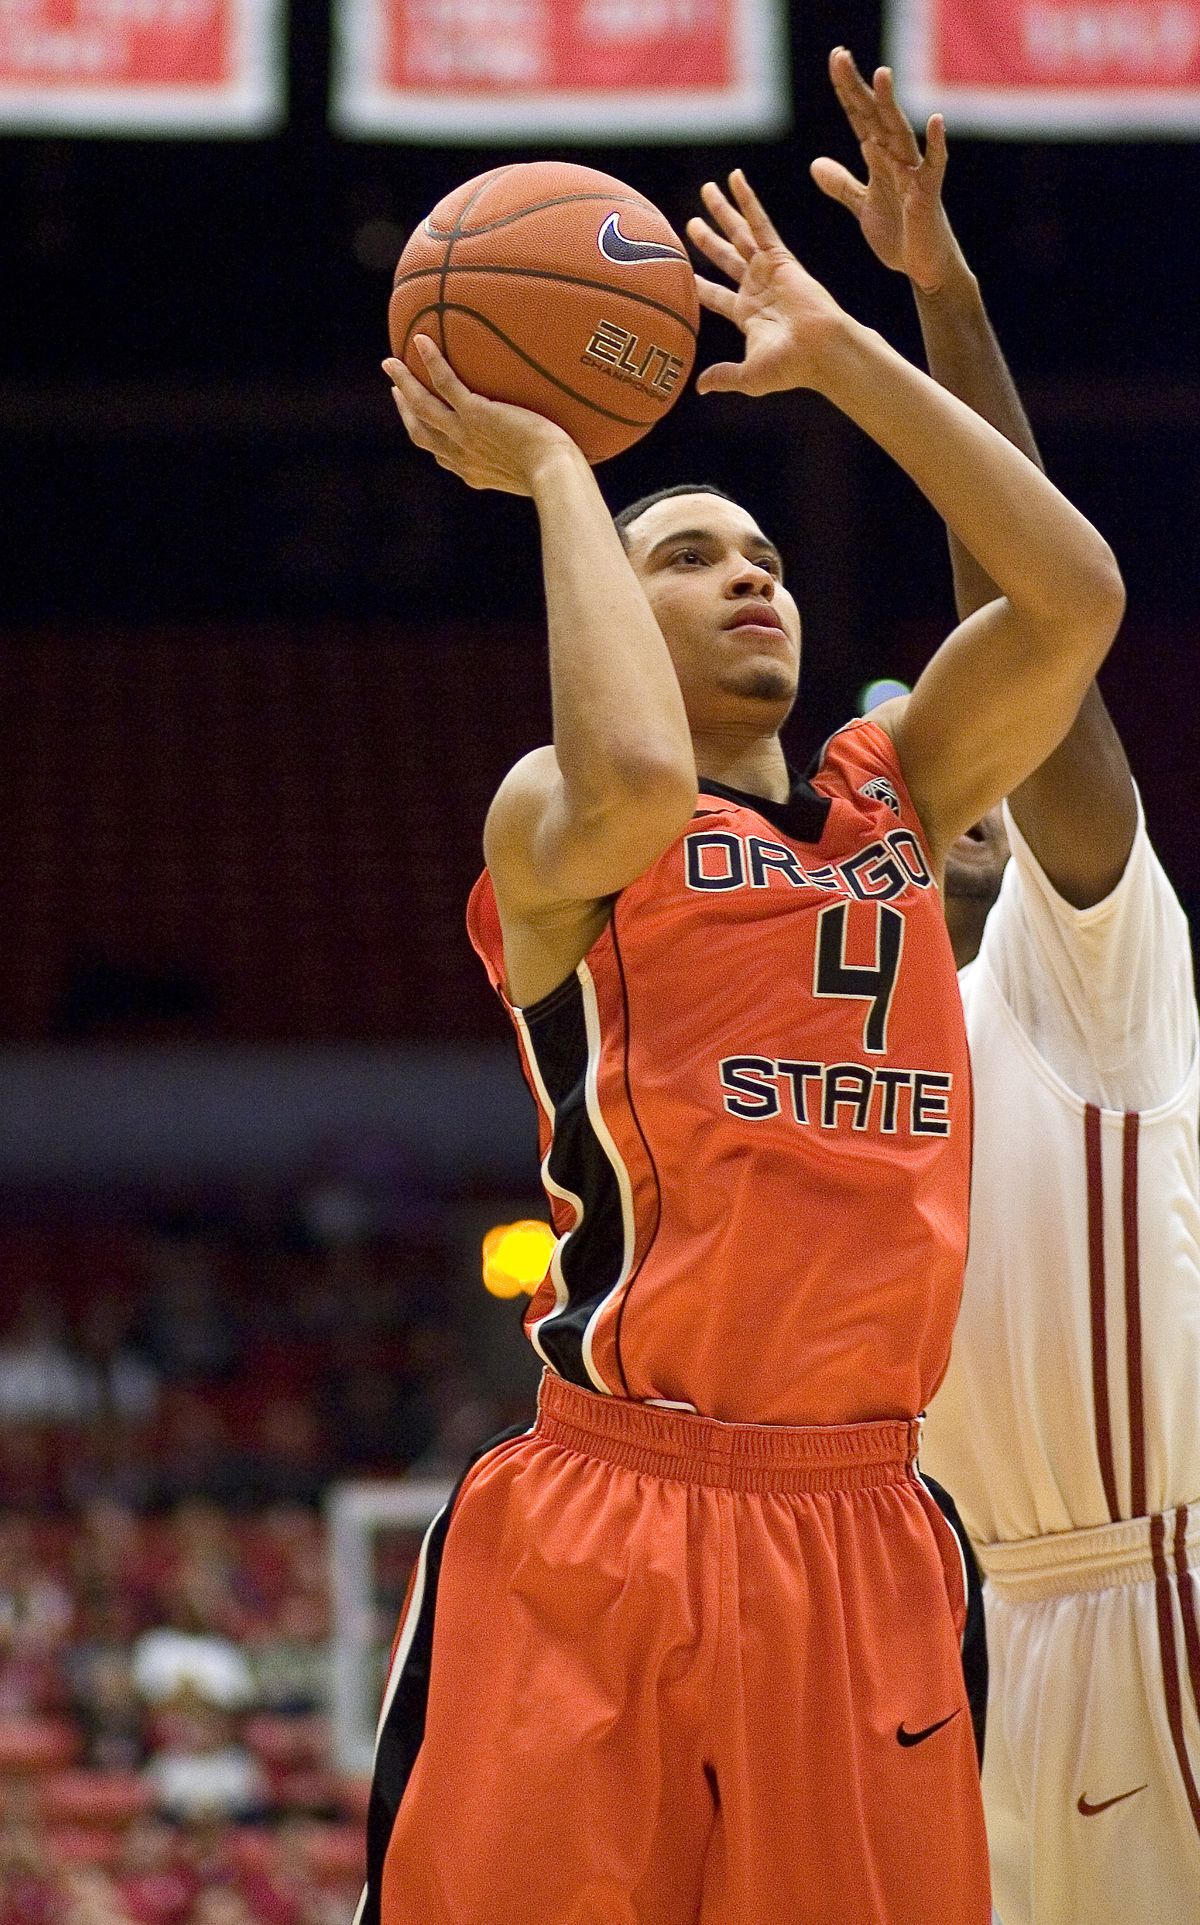 OSU’s Challe Barton shoots in the first half. (Associated Press)